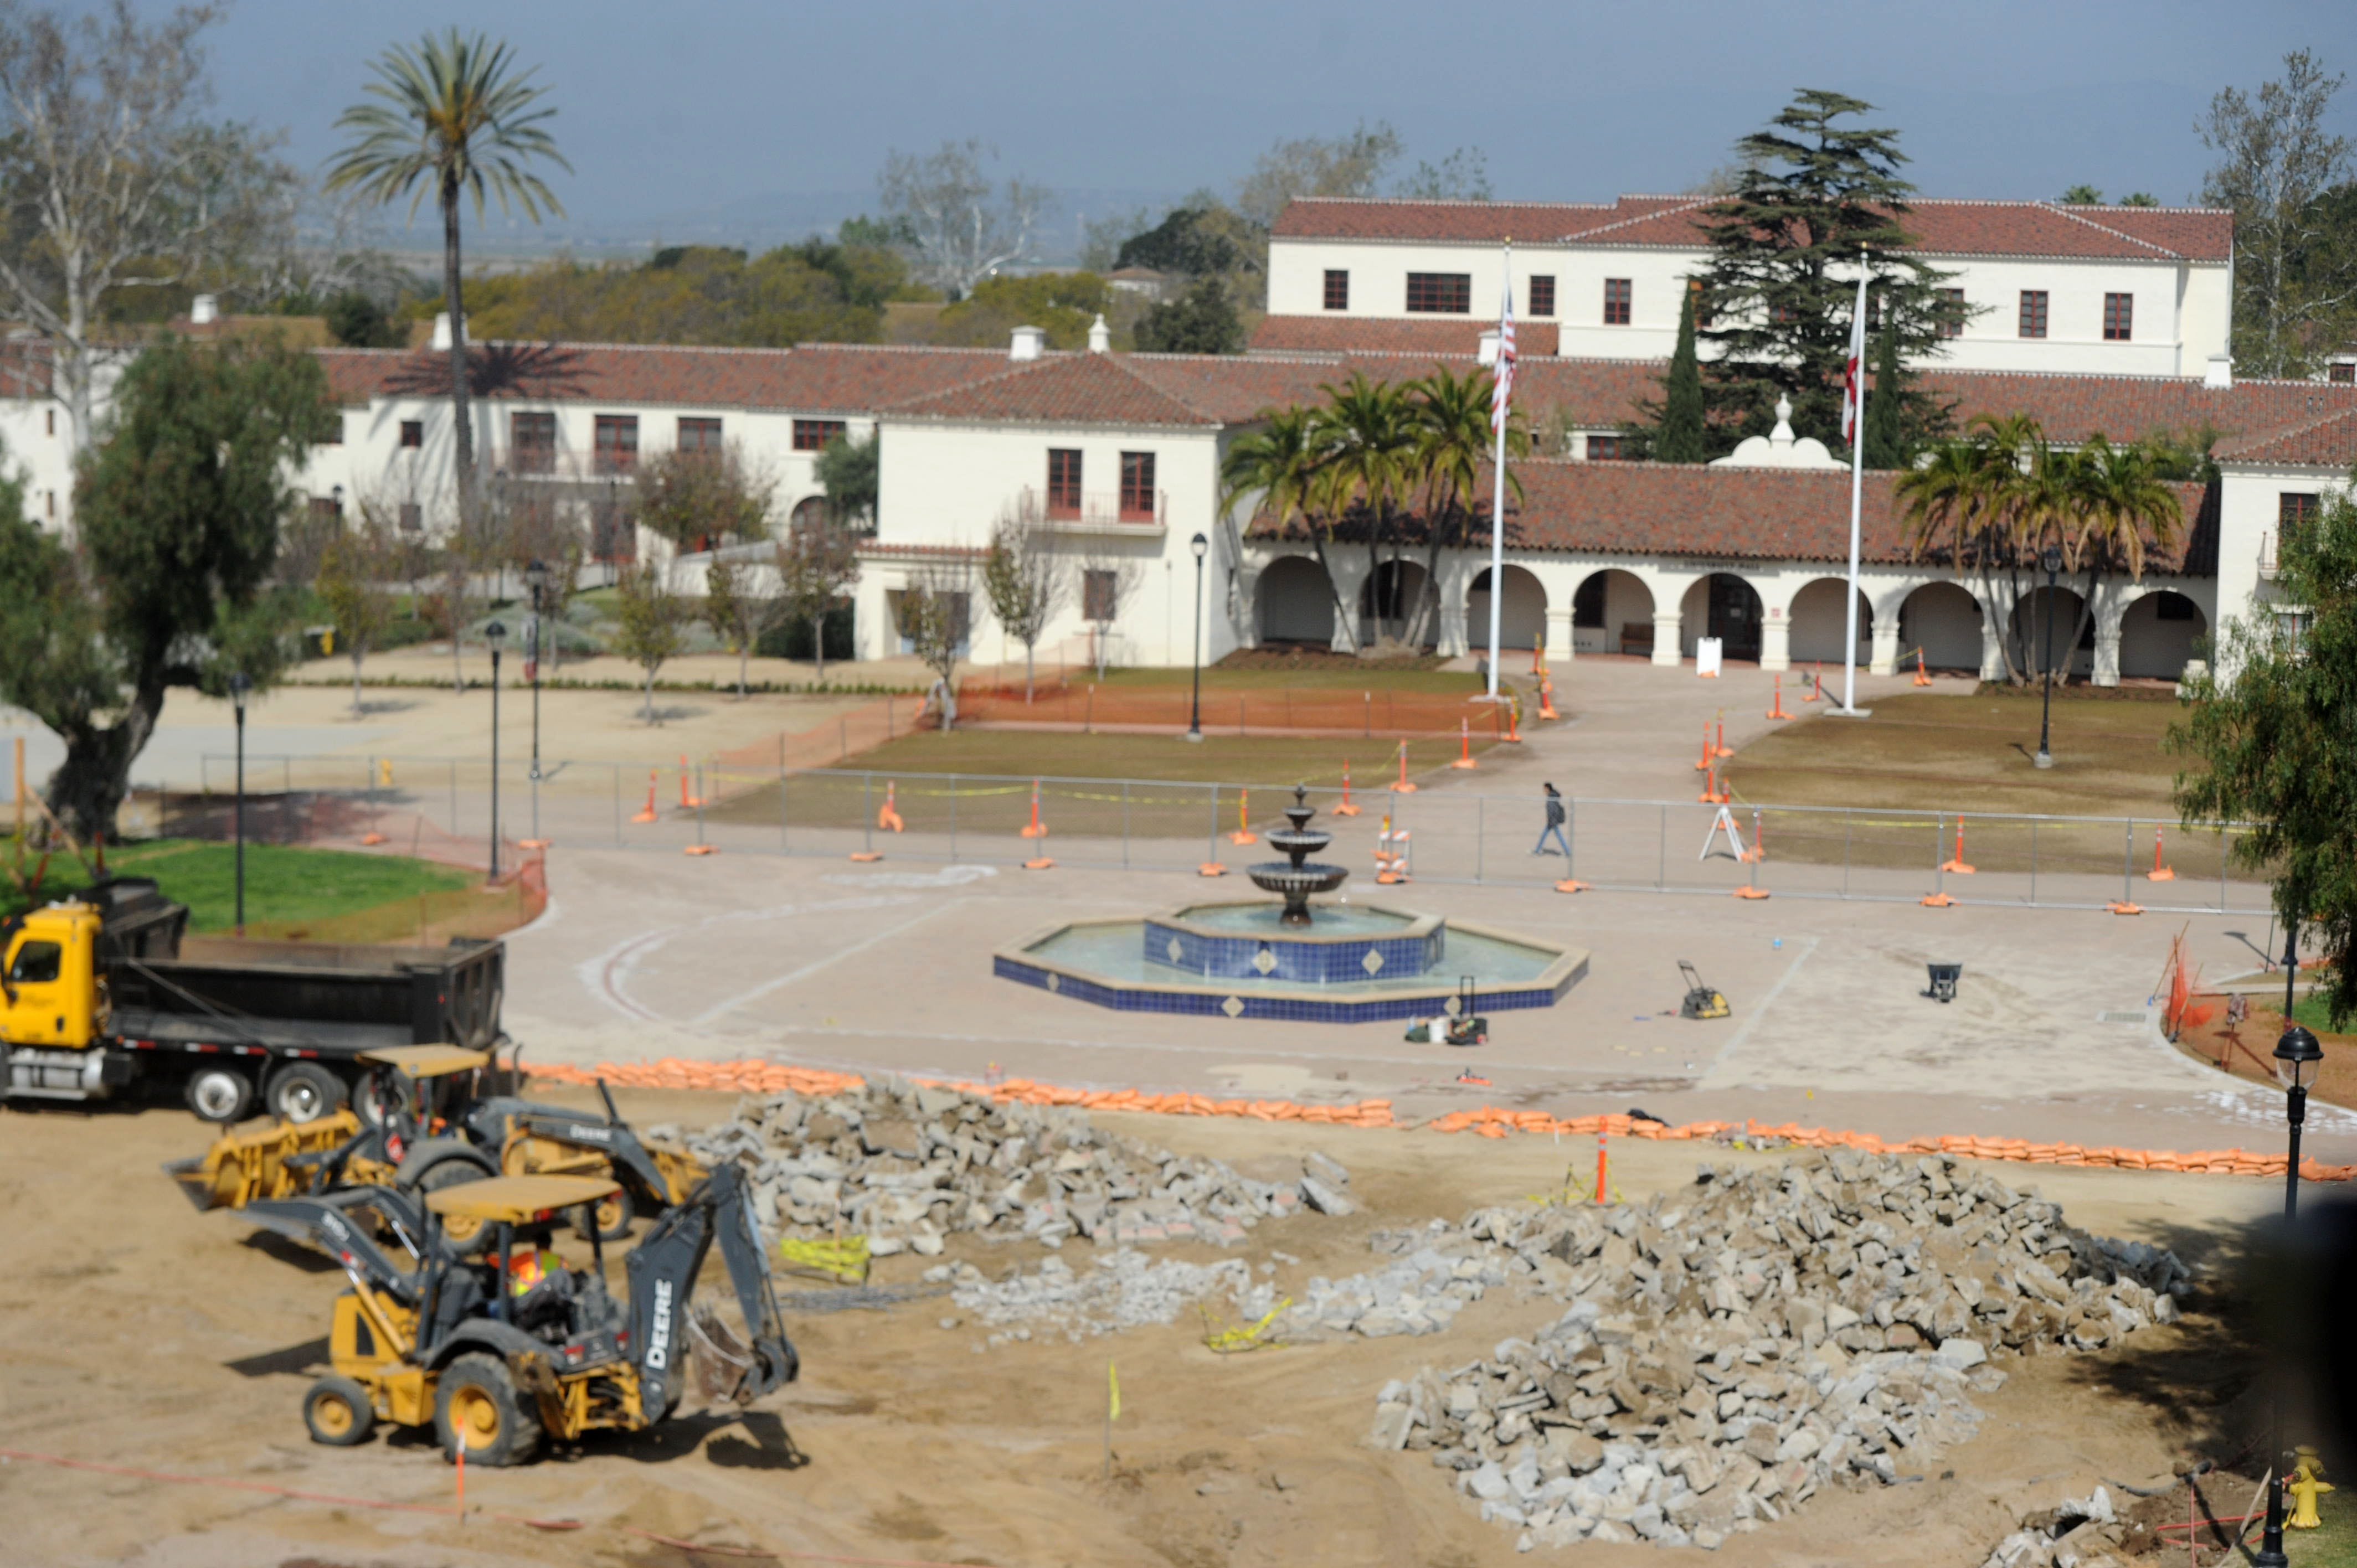 CSUCI is building for the future, school president says